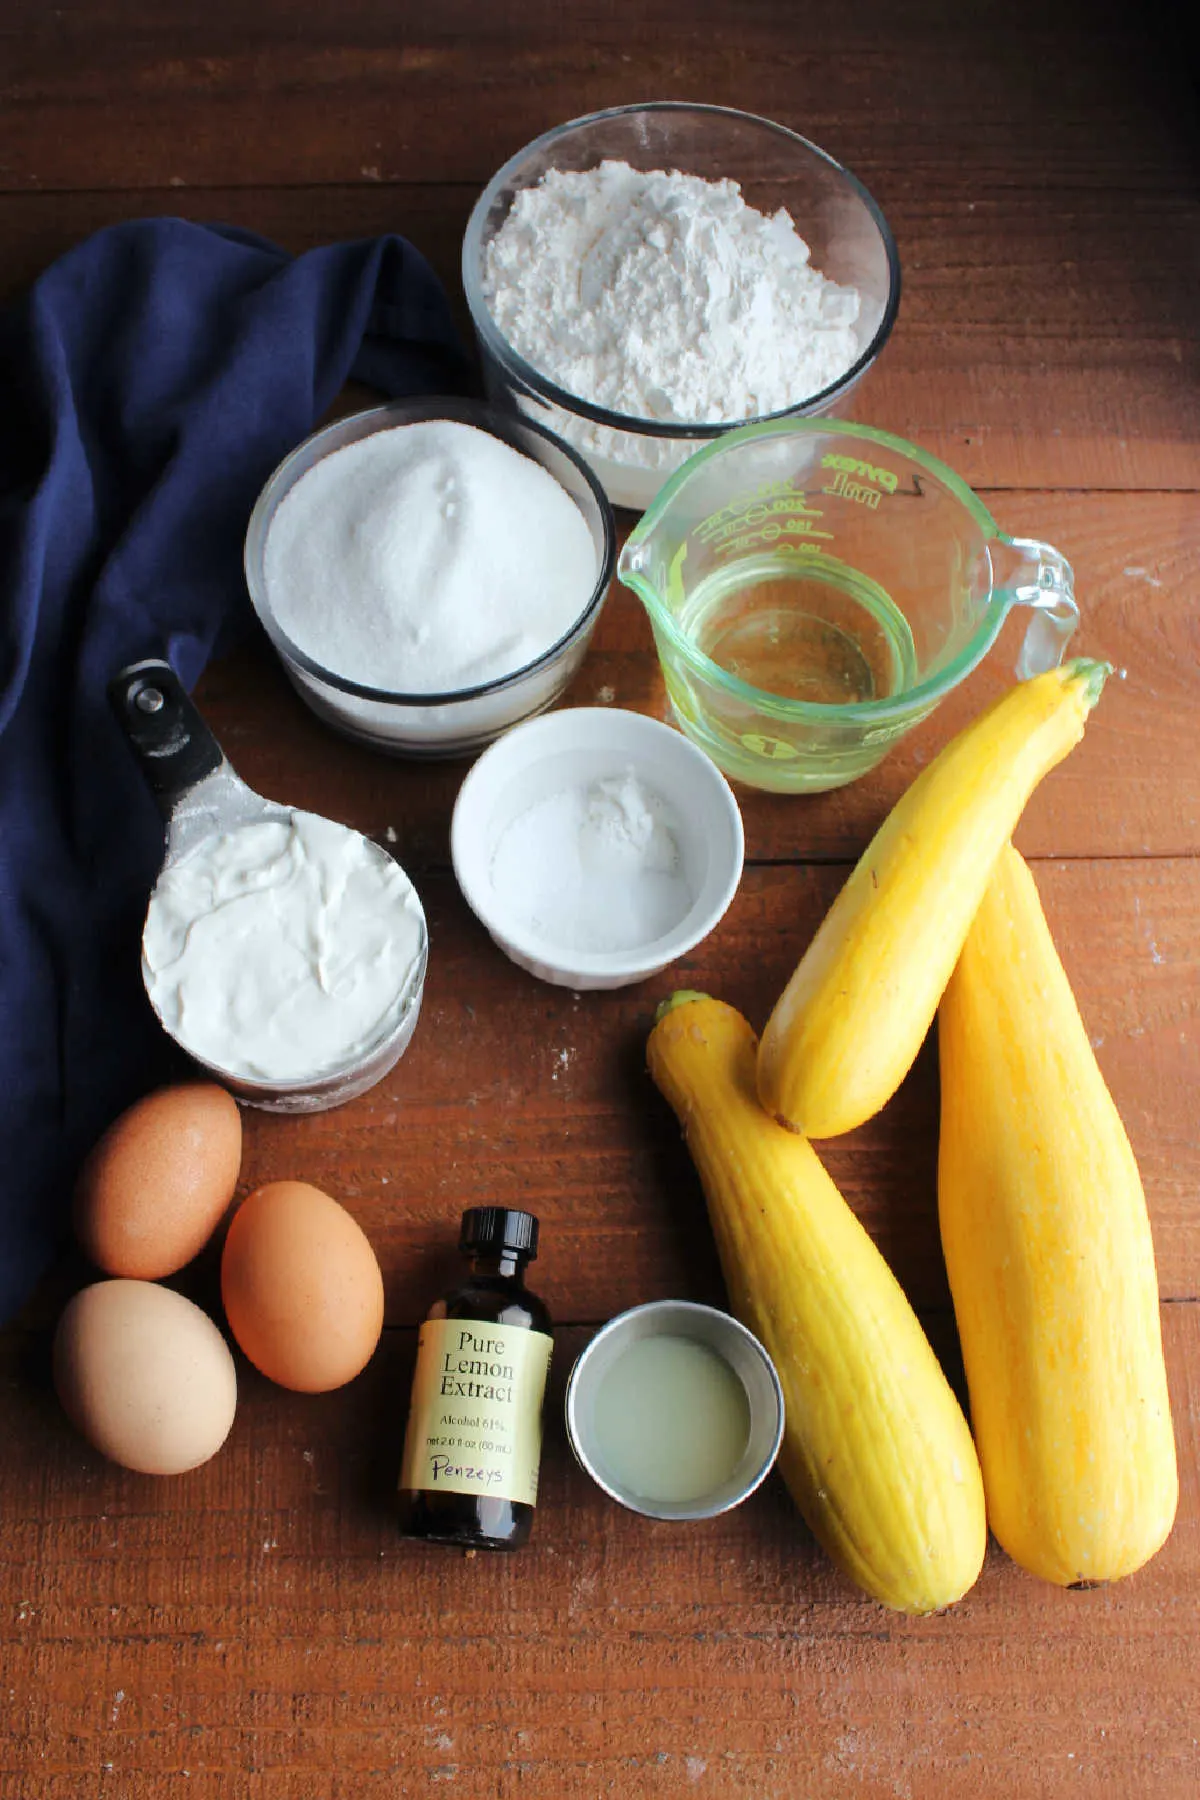 Ingredients including summer squash, lemon juice, lemon extract, eggs, sour cream, oil, sugar, flour, baking powder and salt, ready to be made into muffin batter.